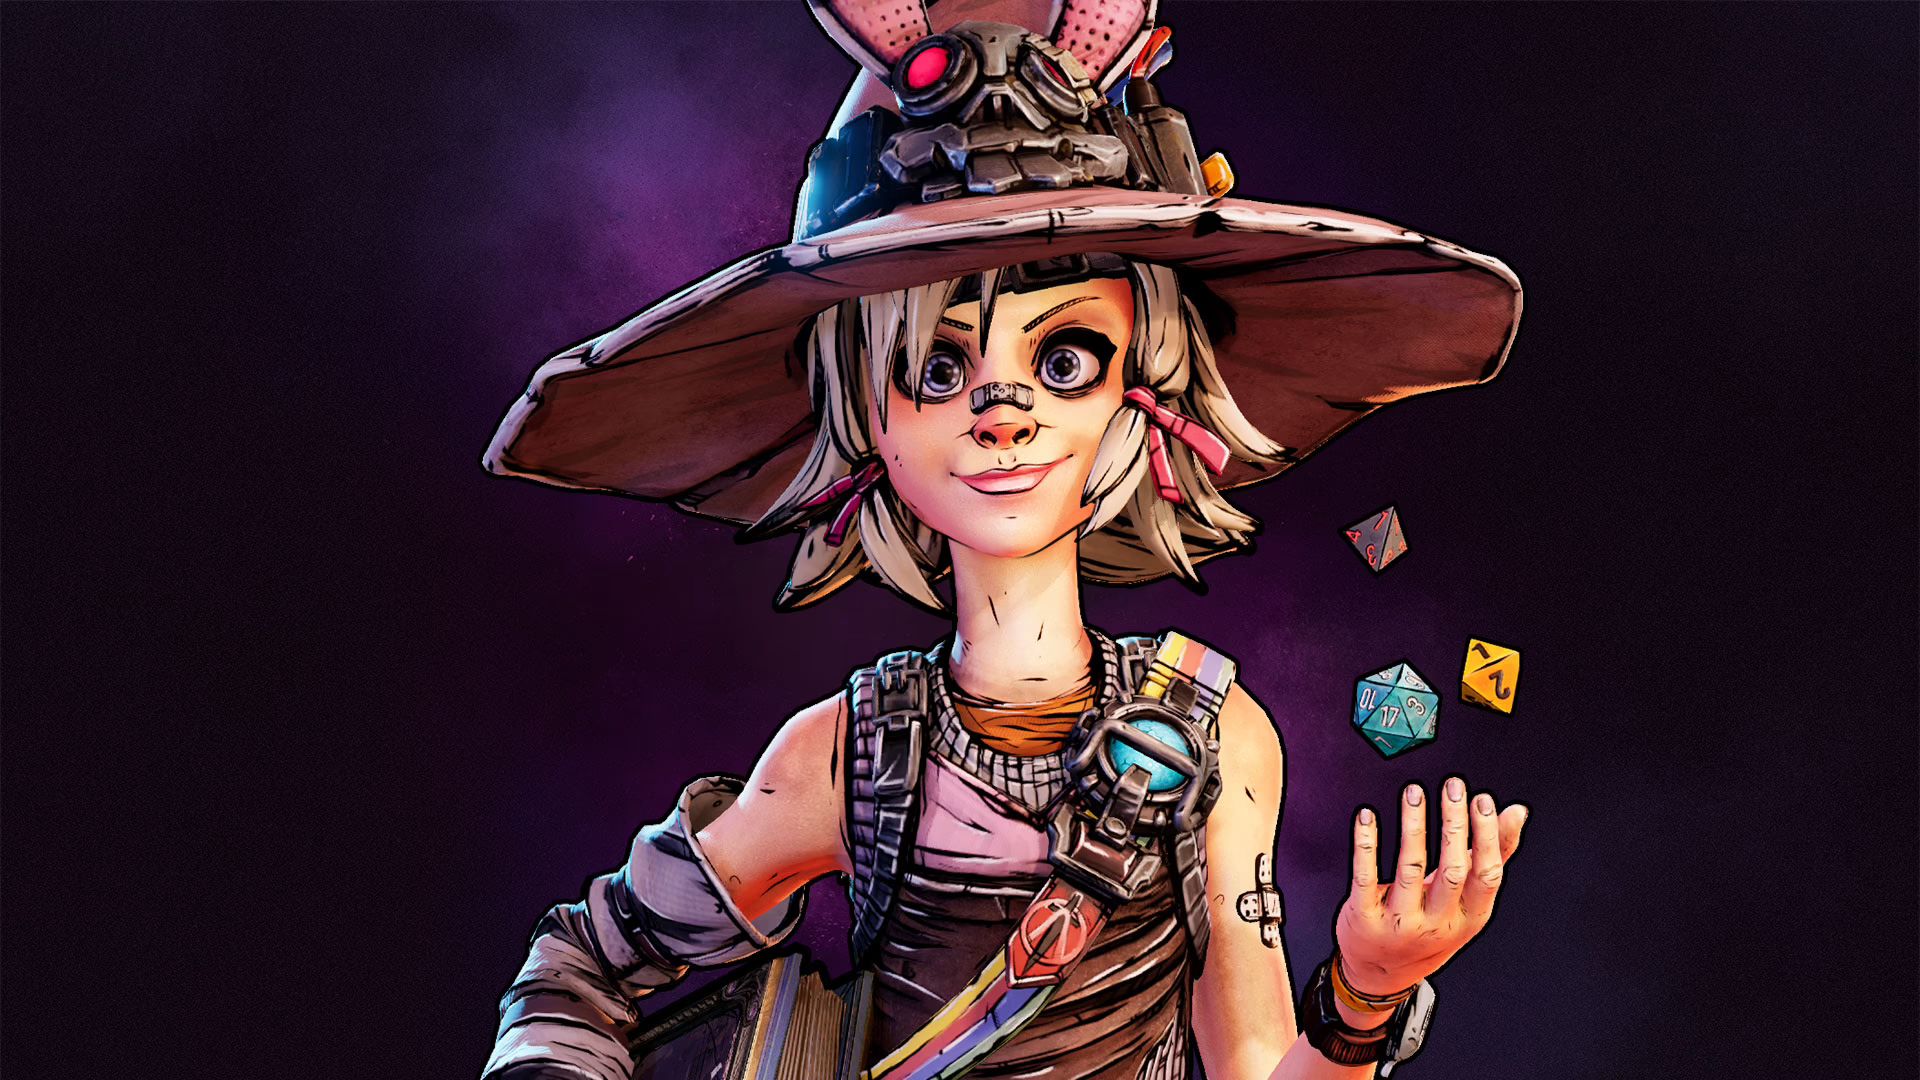 Image for Gearbox to acquire Tiny Tina co-developer Lost Boys Interactive